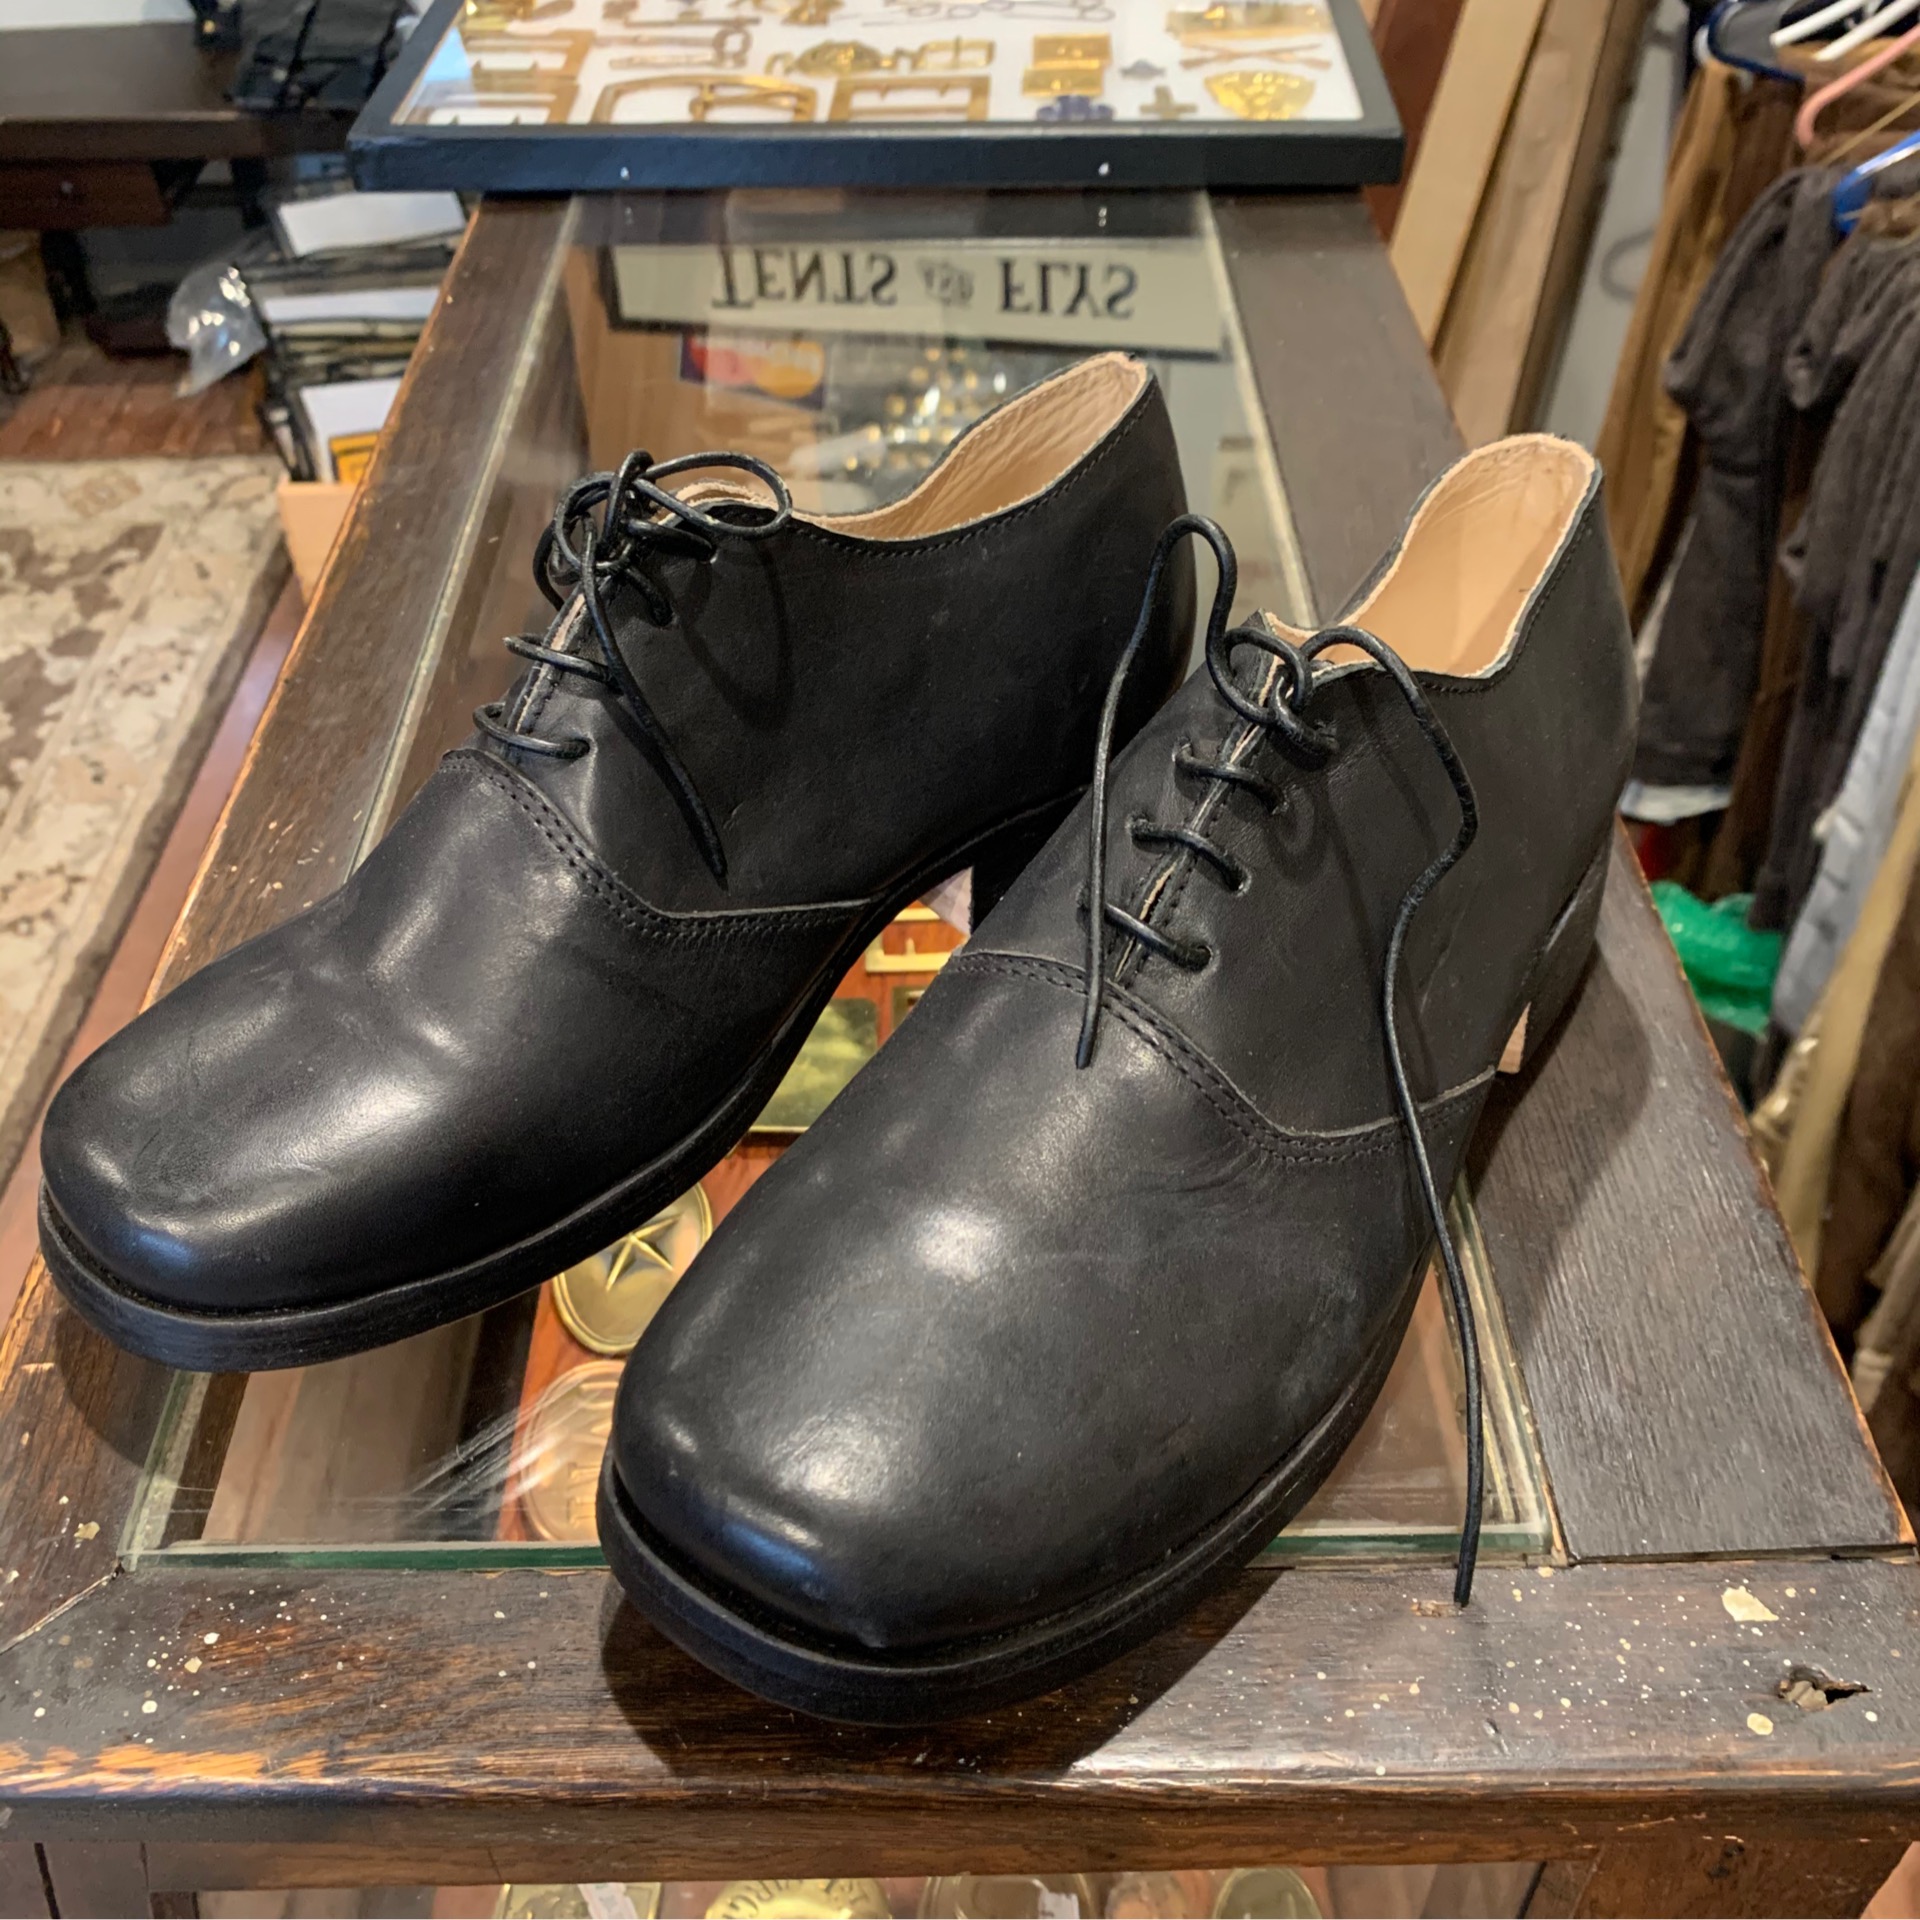 Civilian Shoes - The Maryland Sutler